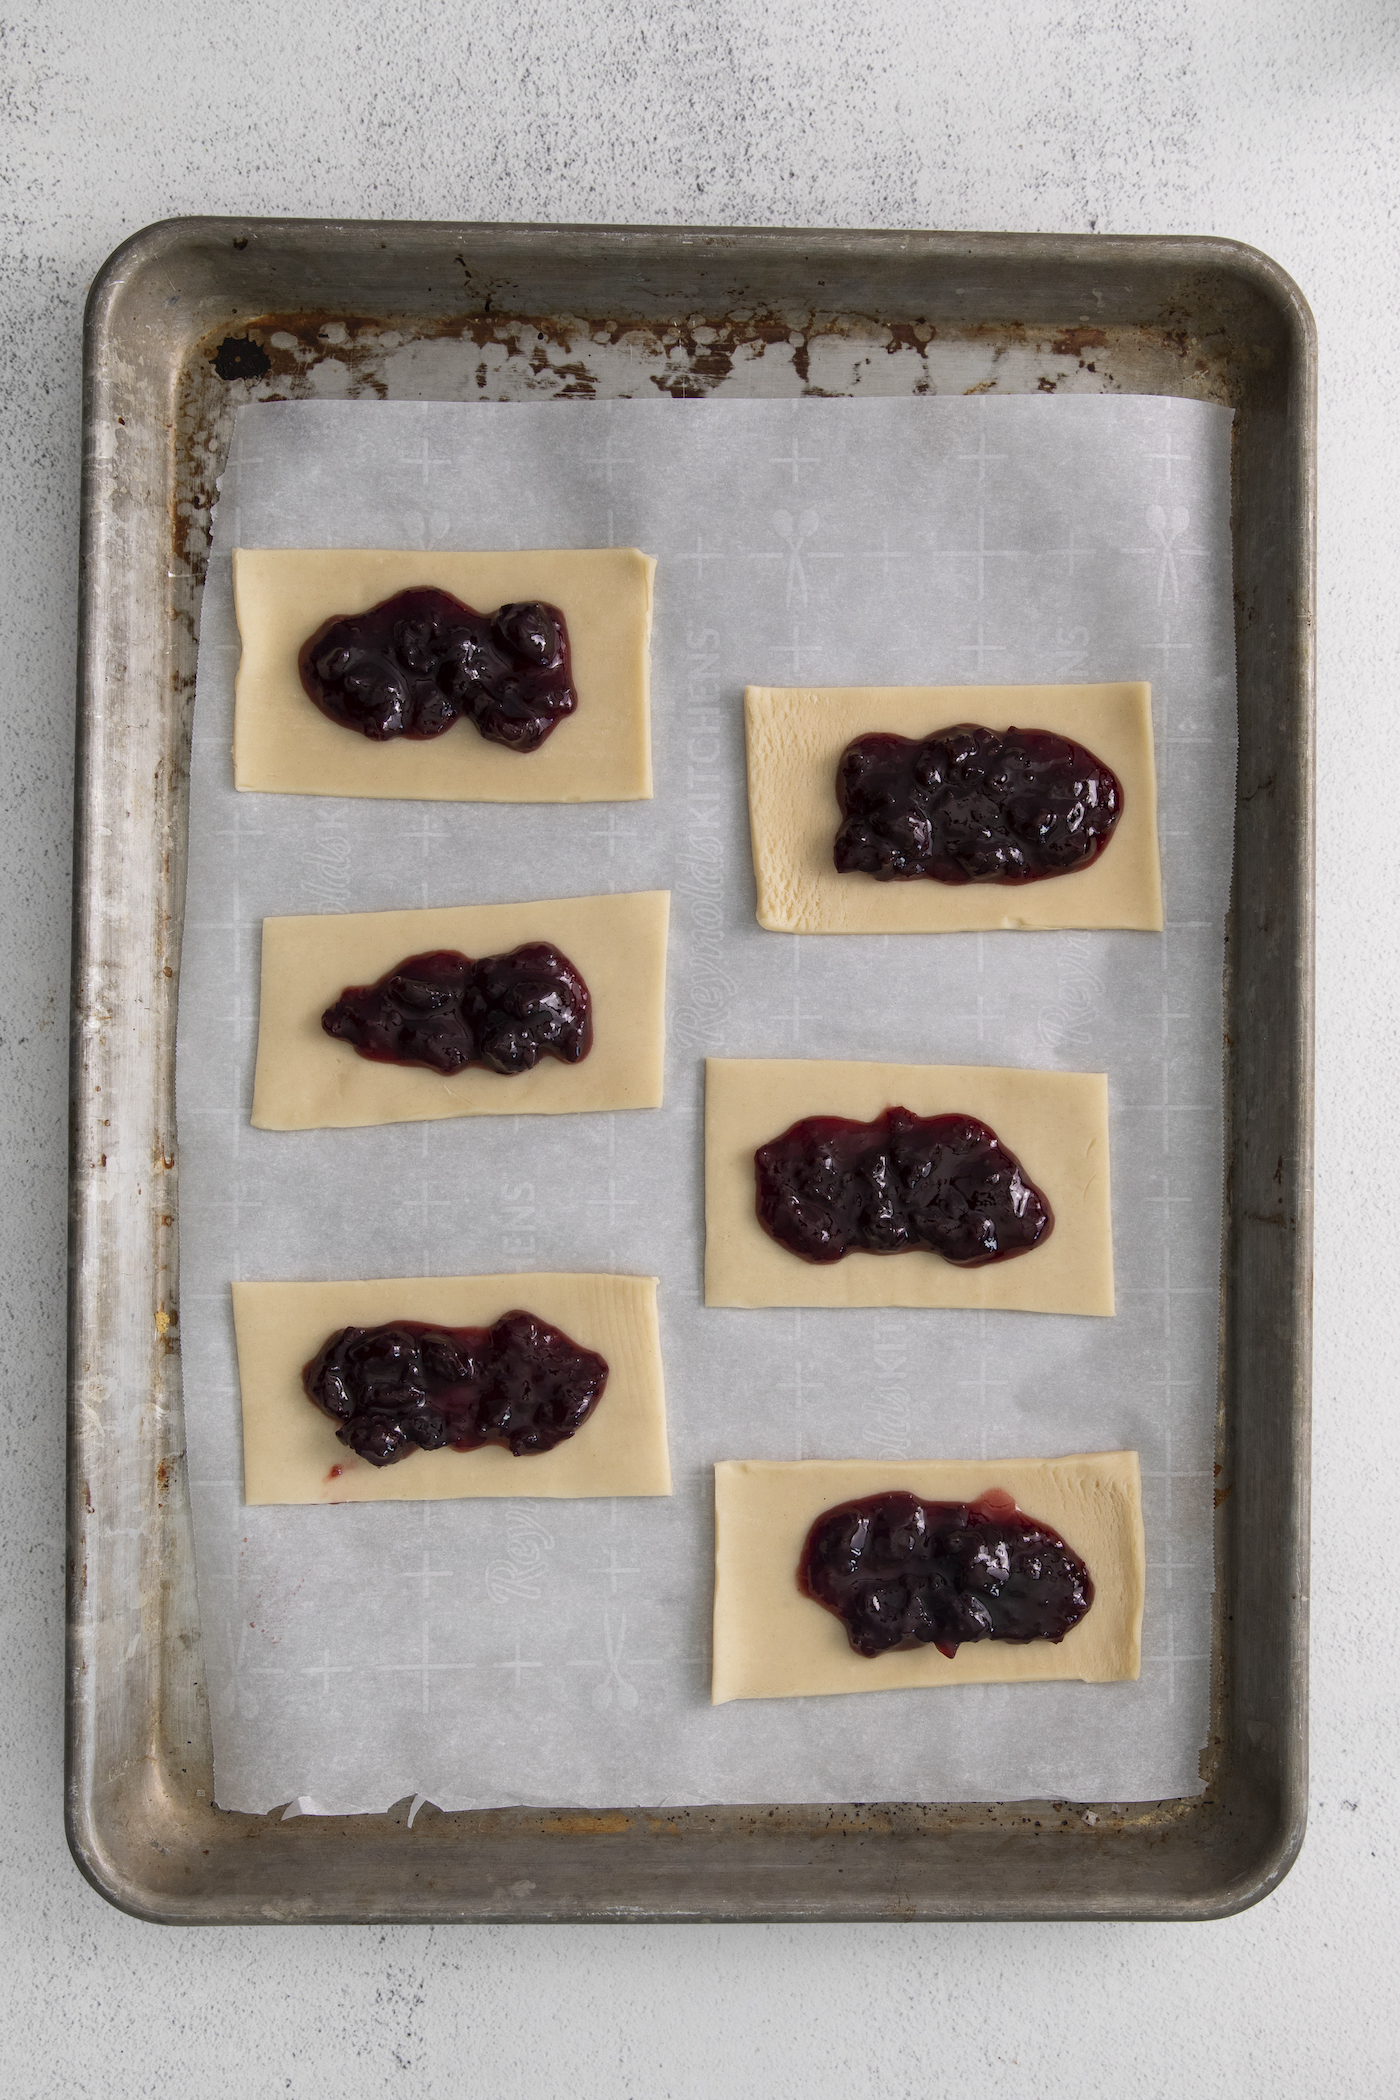 Jam added to the top of the pastry dough